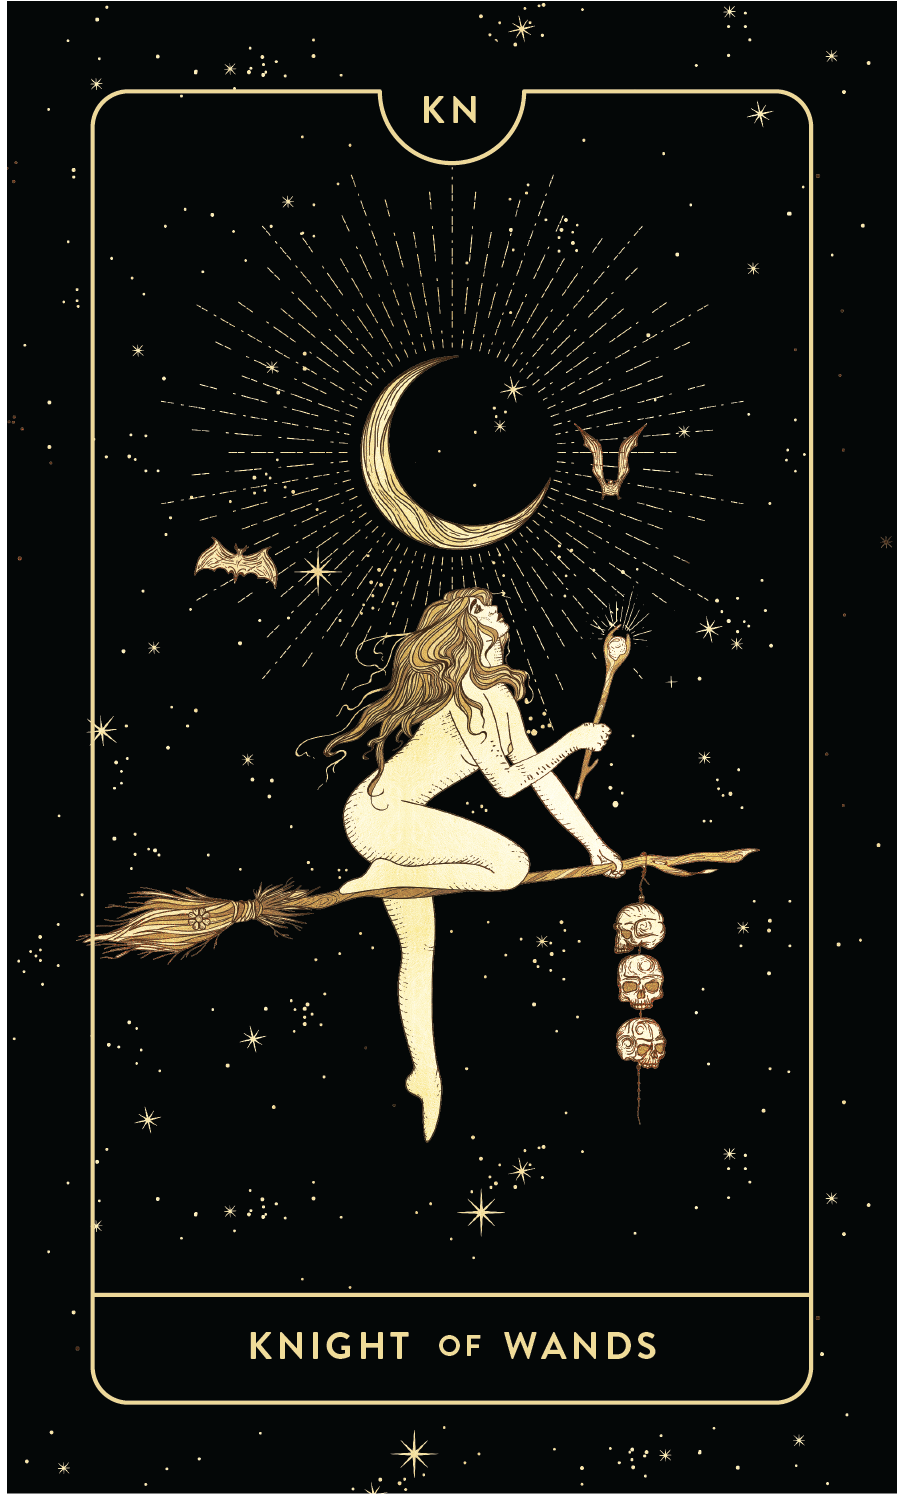 KNIGHT OF WANDS